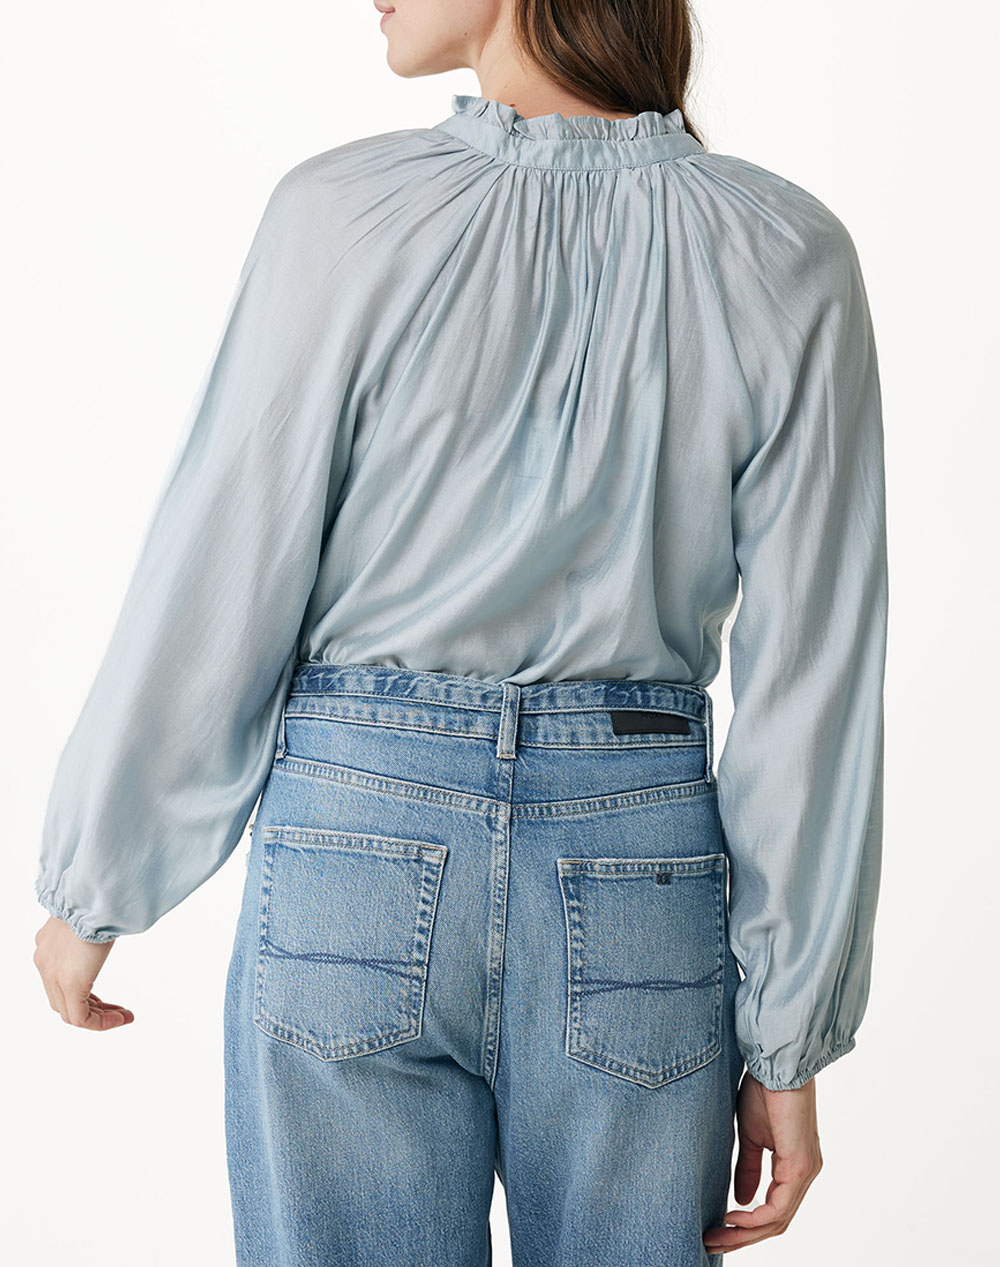 MEXX shirt with ruffled collar stand